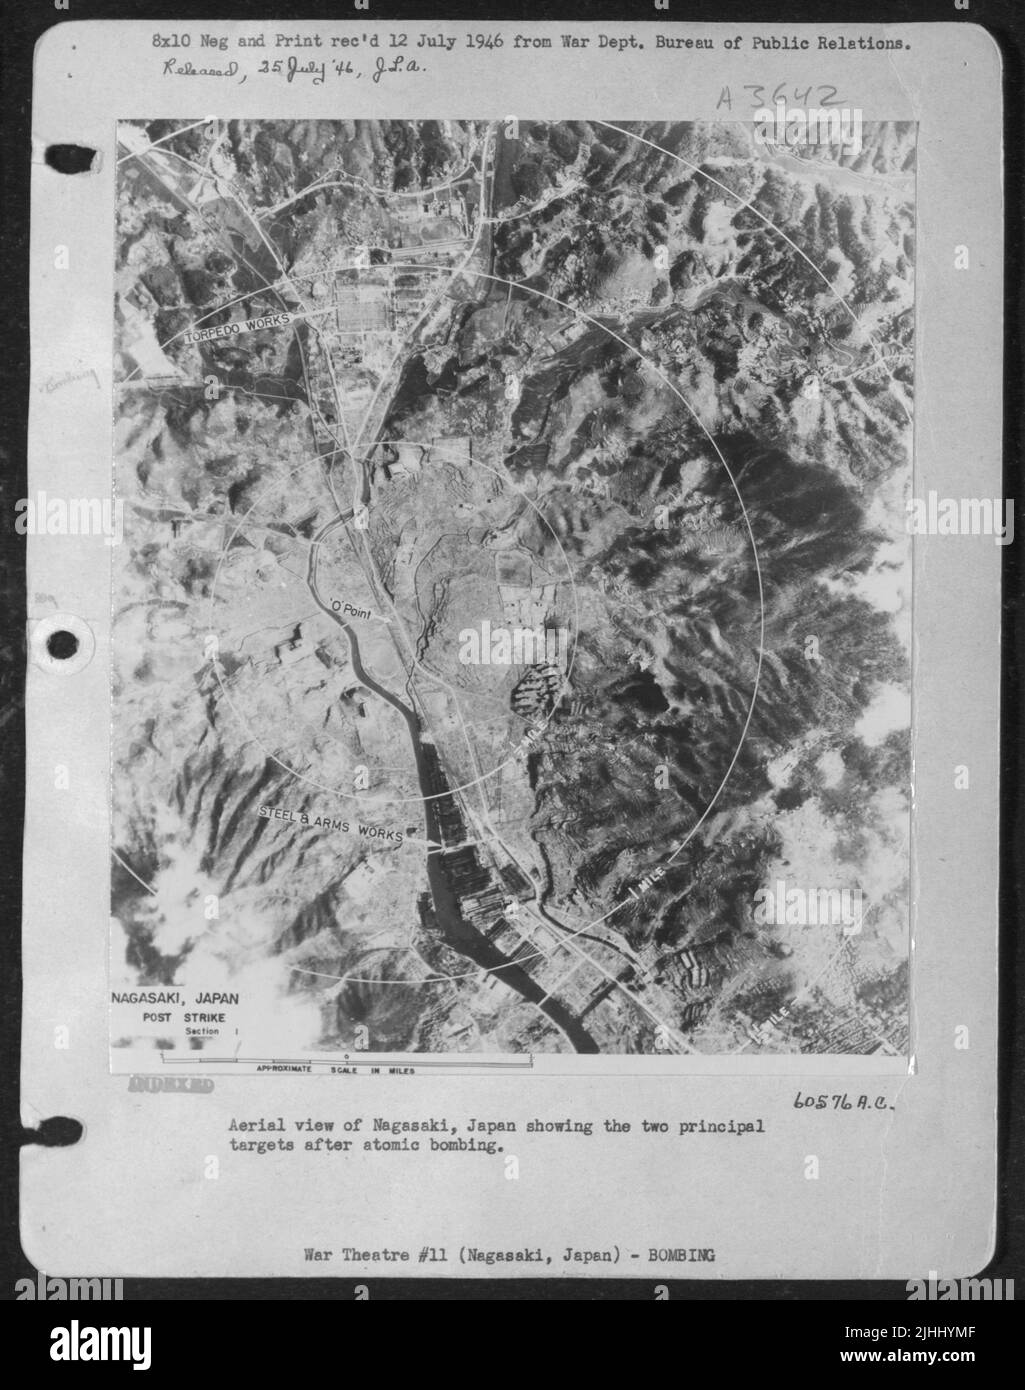 Aerial View Of Nagasaki, Japan Showing The Two Principal Targets After Atomic Bombing. Stock Photo